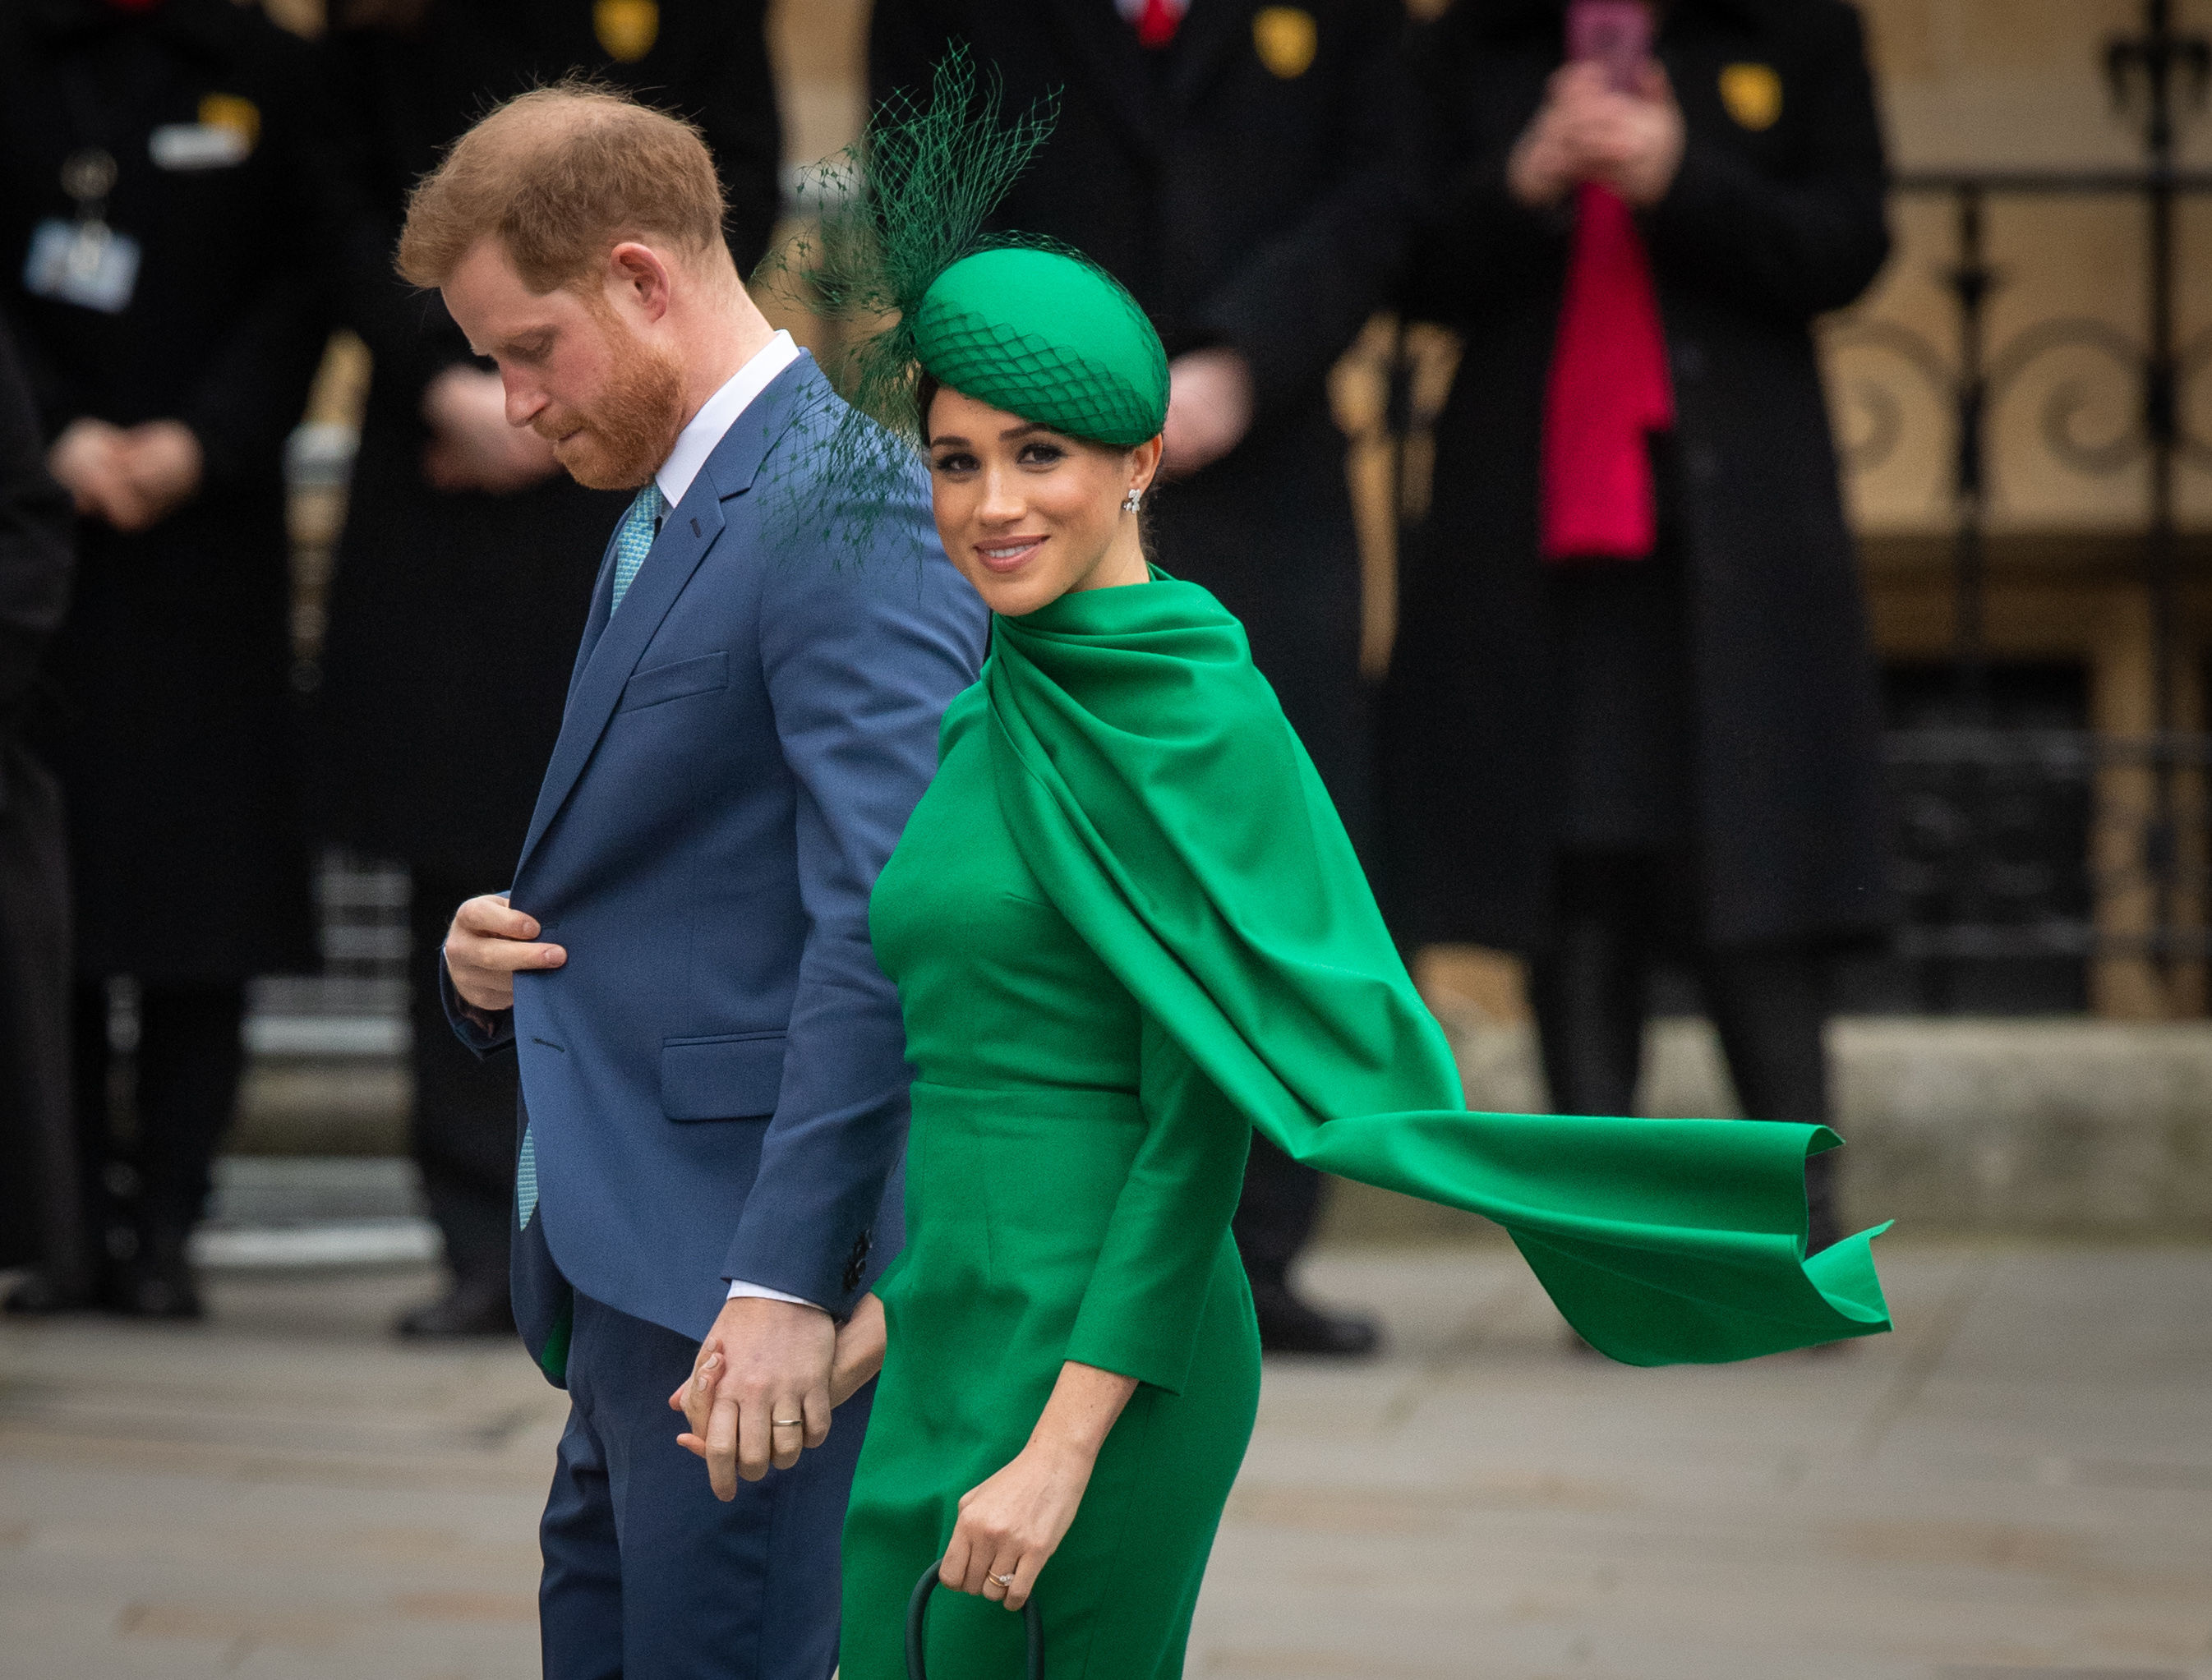 Scandals 2020: Prince Harry and Meghan Markle